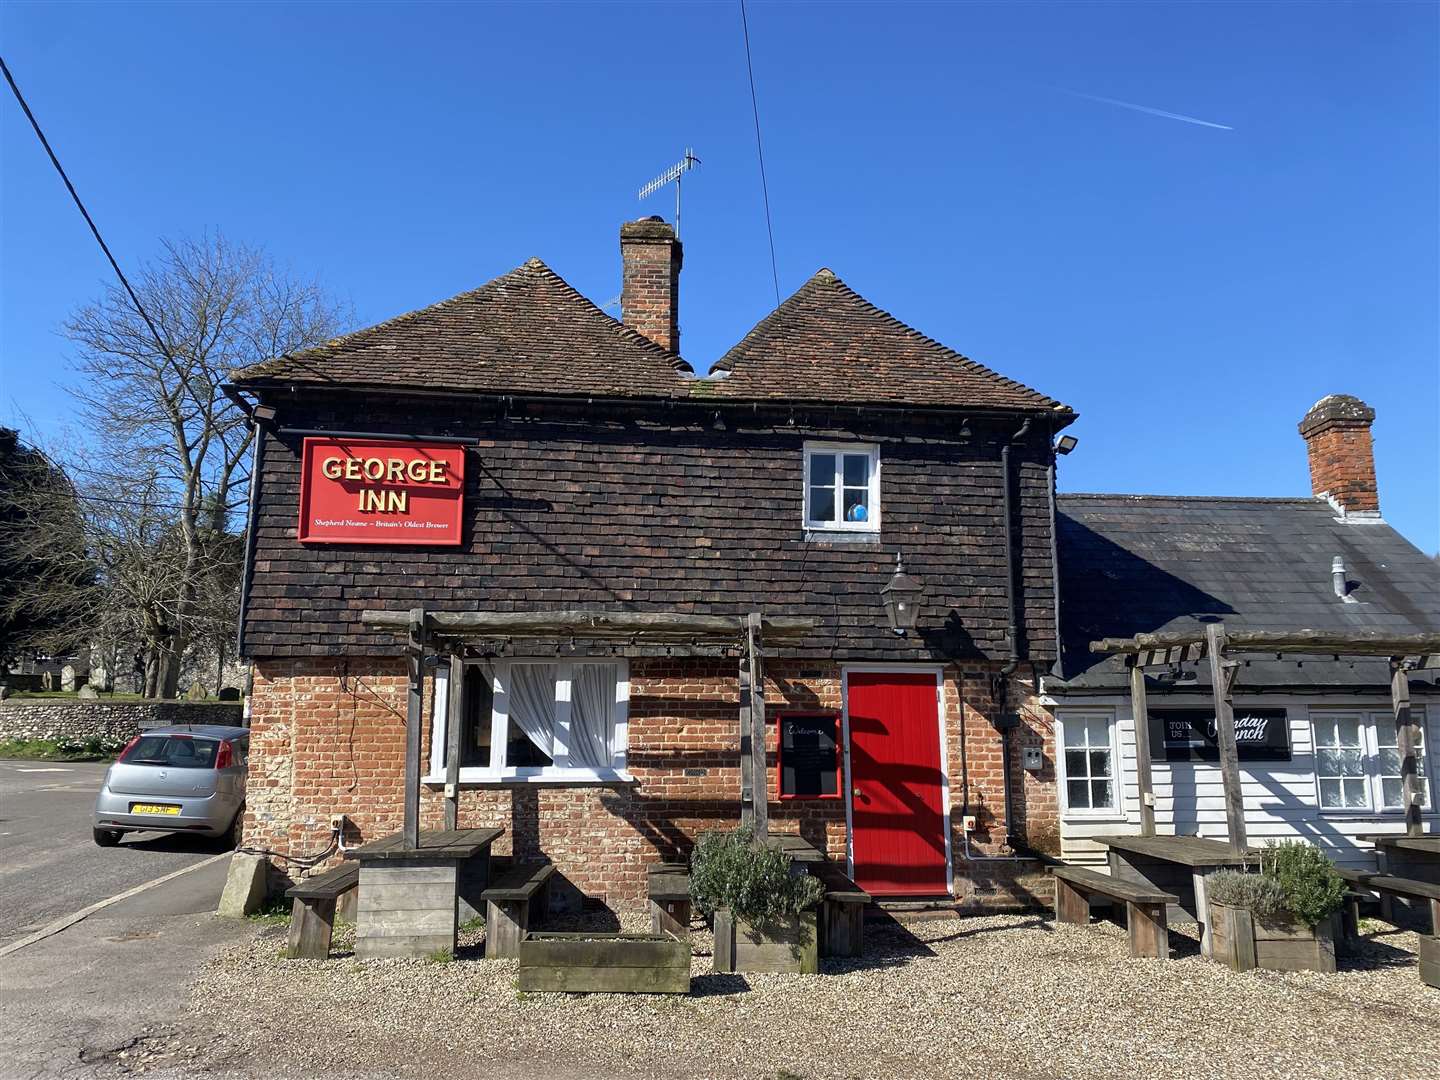 The George Inn, Newnham, has been empty for the past month